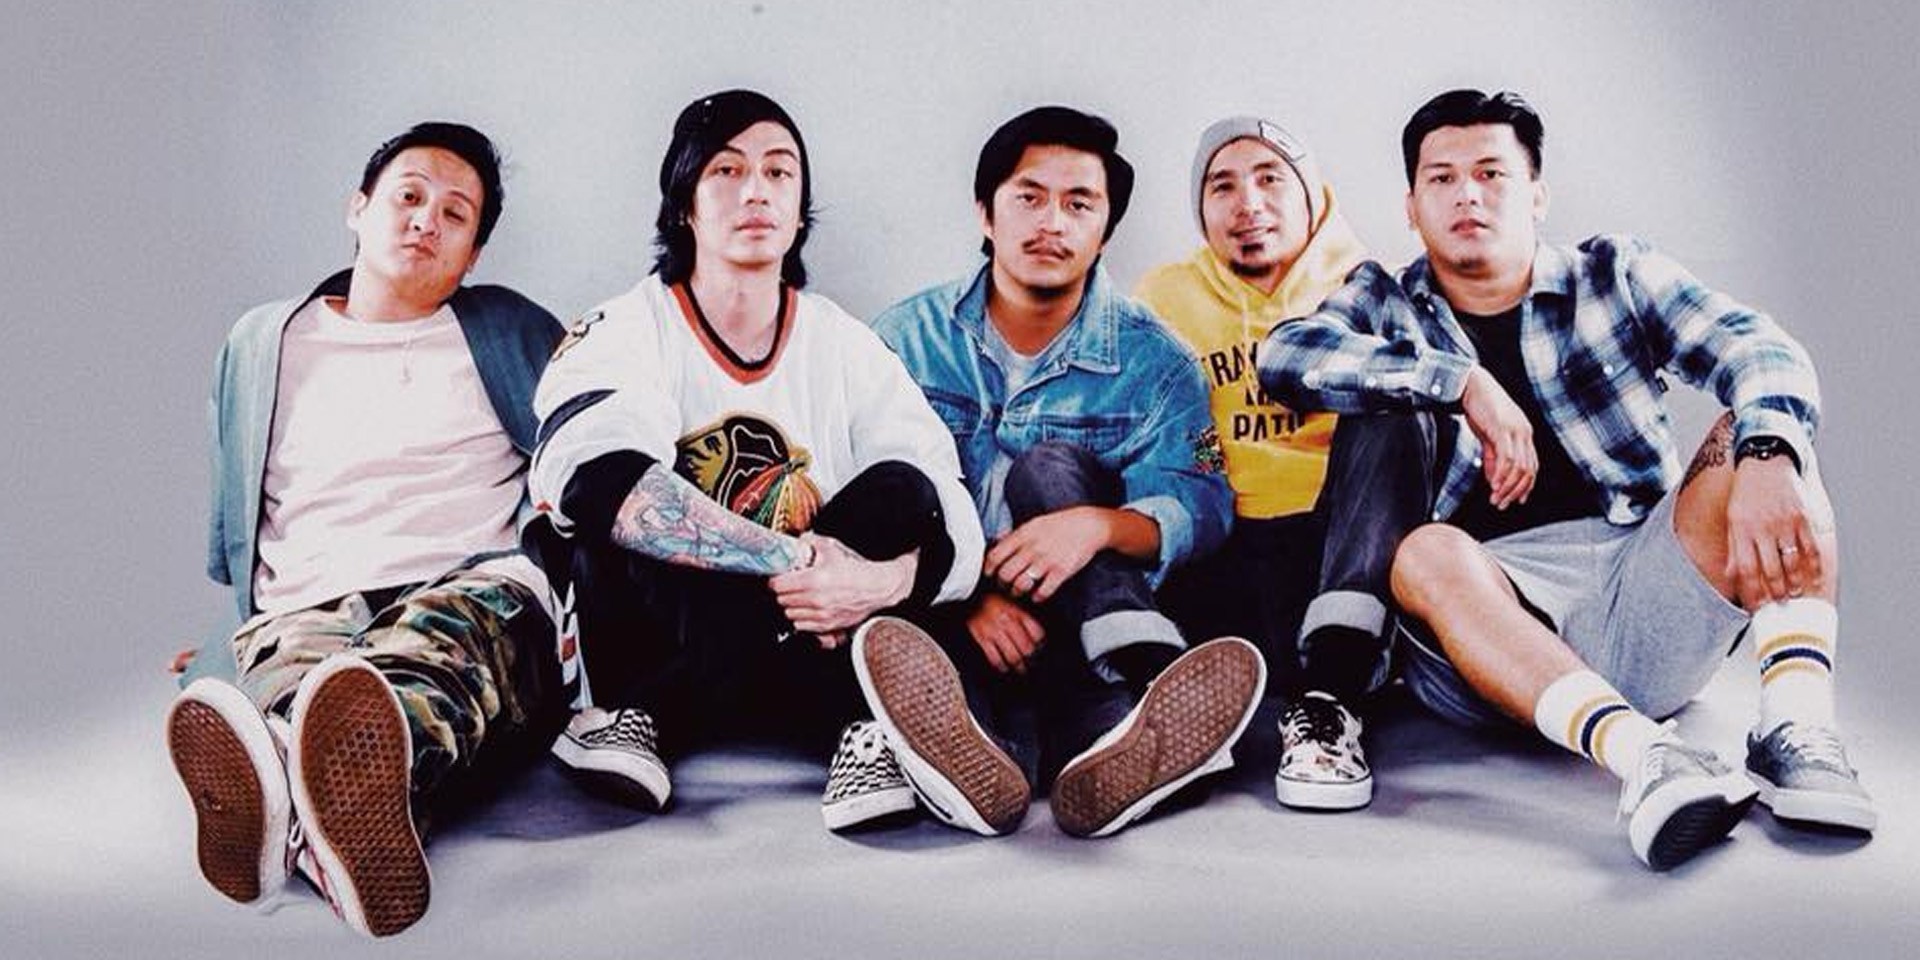 Chicosci unveil new single 'Like We Used To' with lyric video – watch